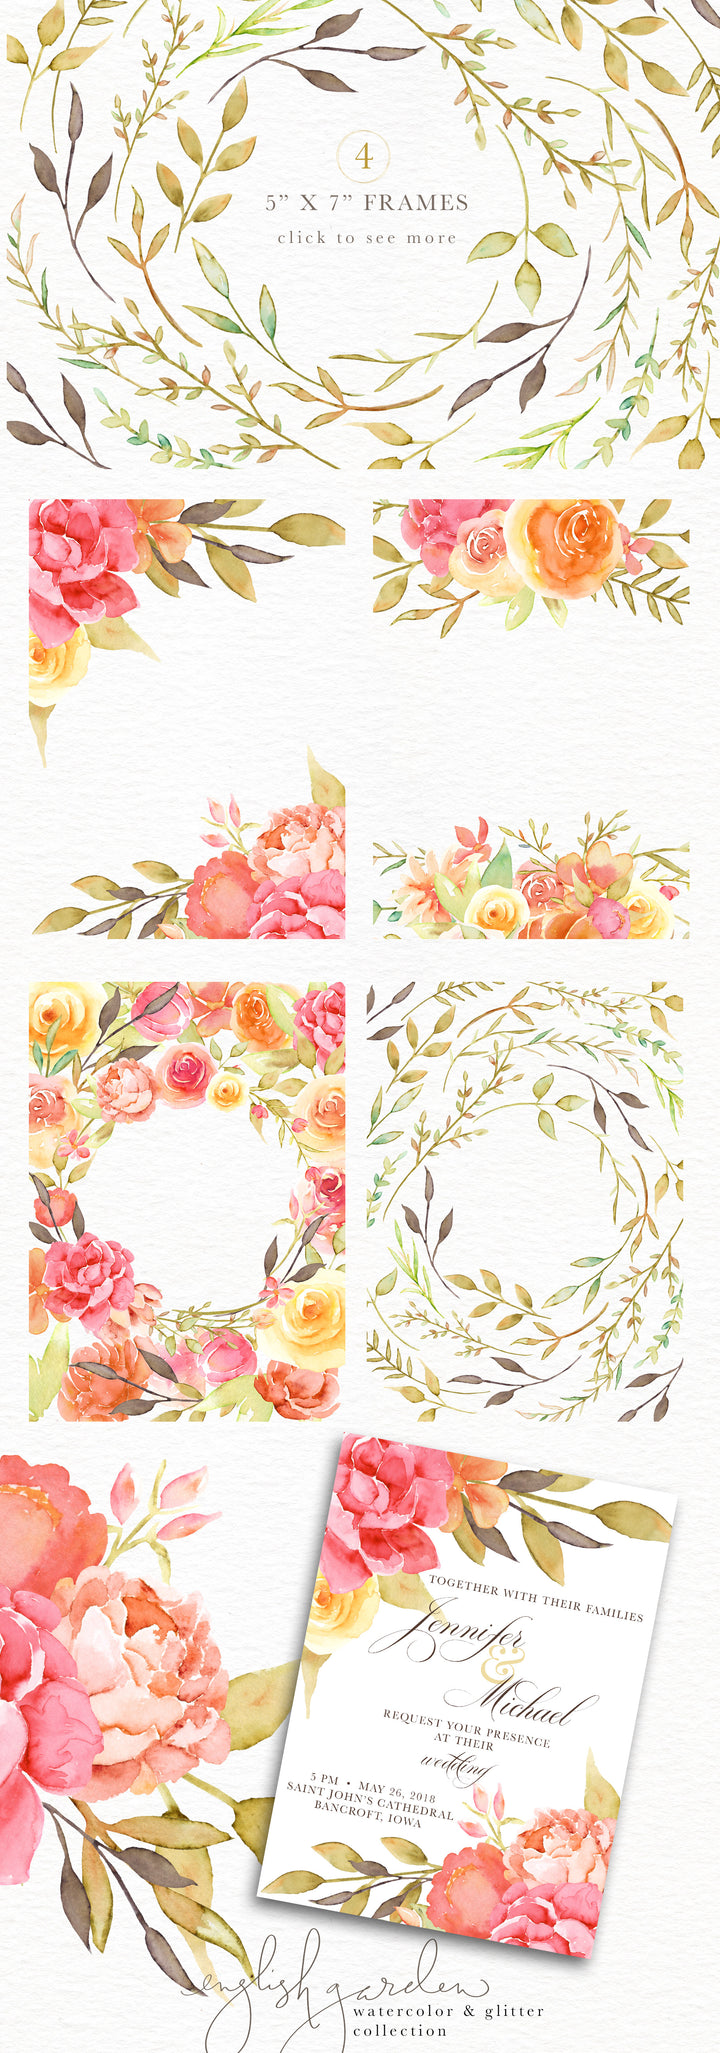 English Garden Watercolor and Glitter Collection